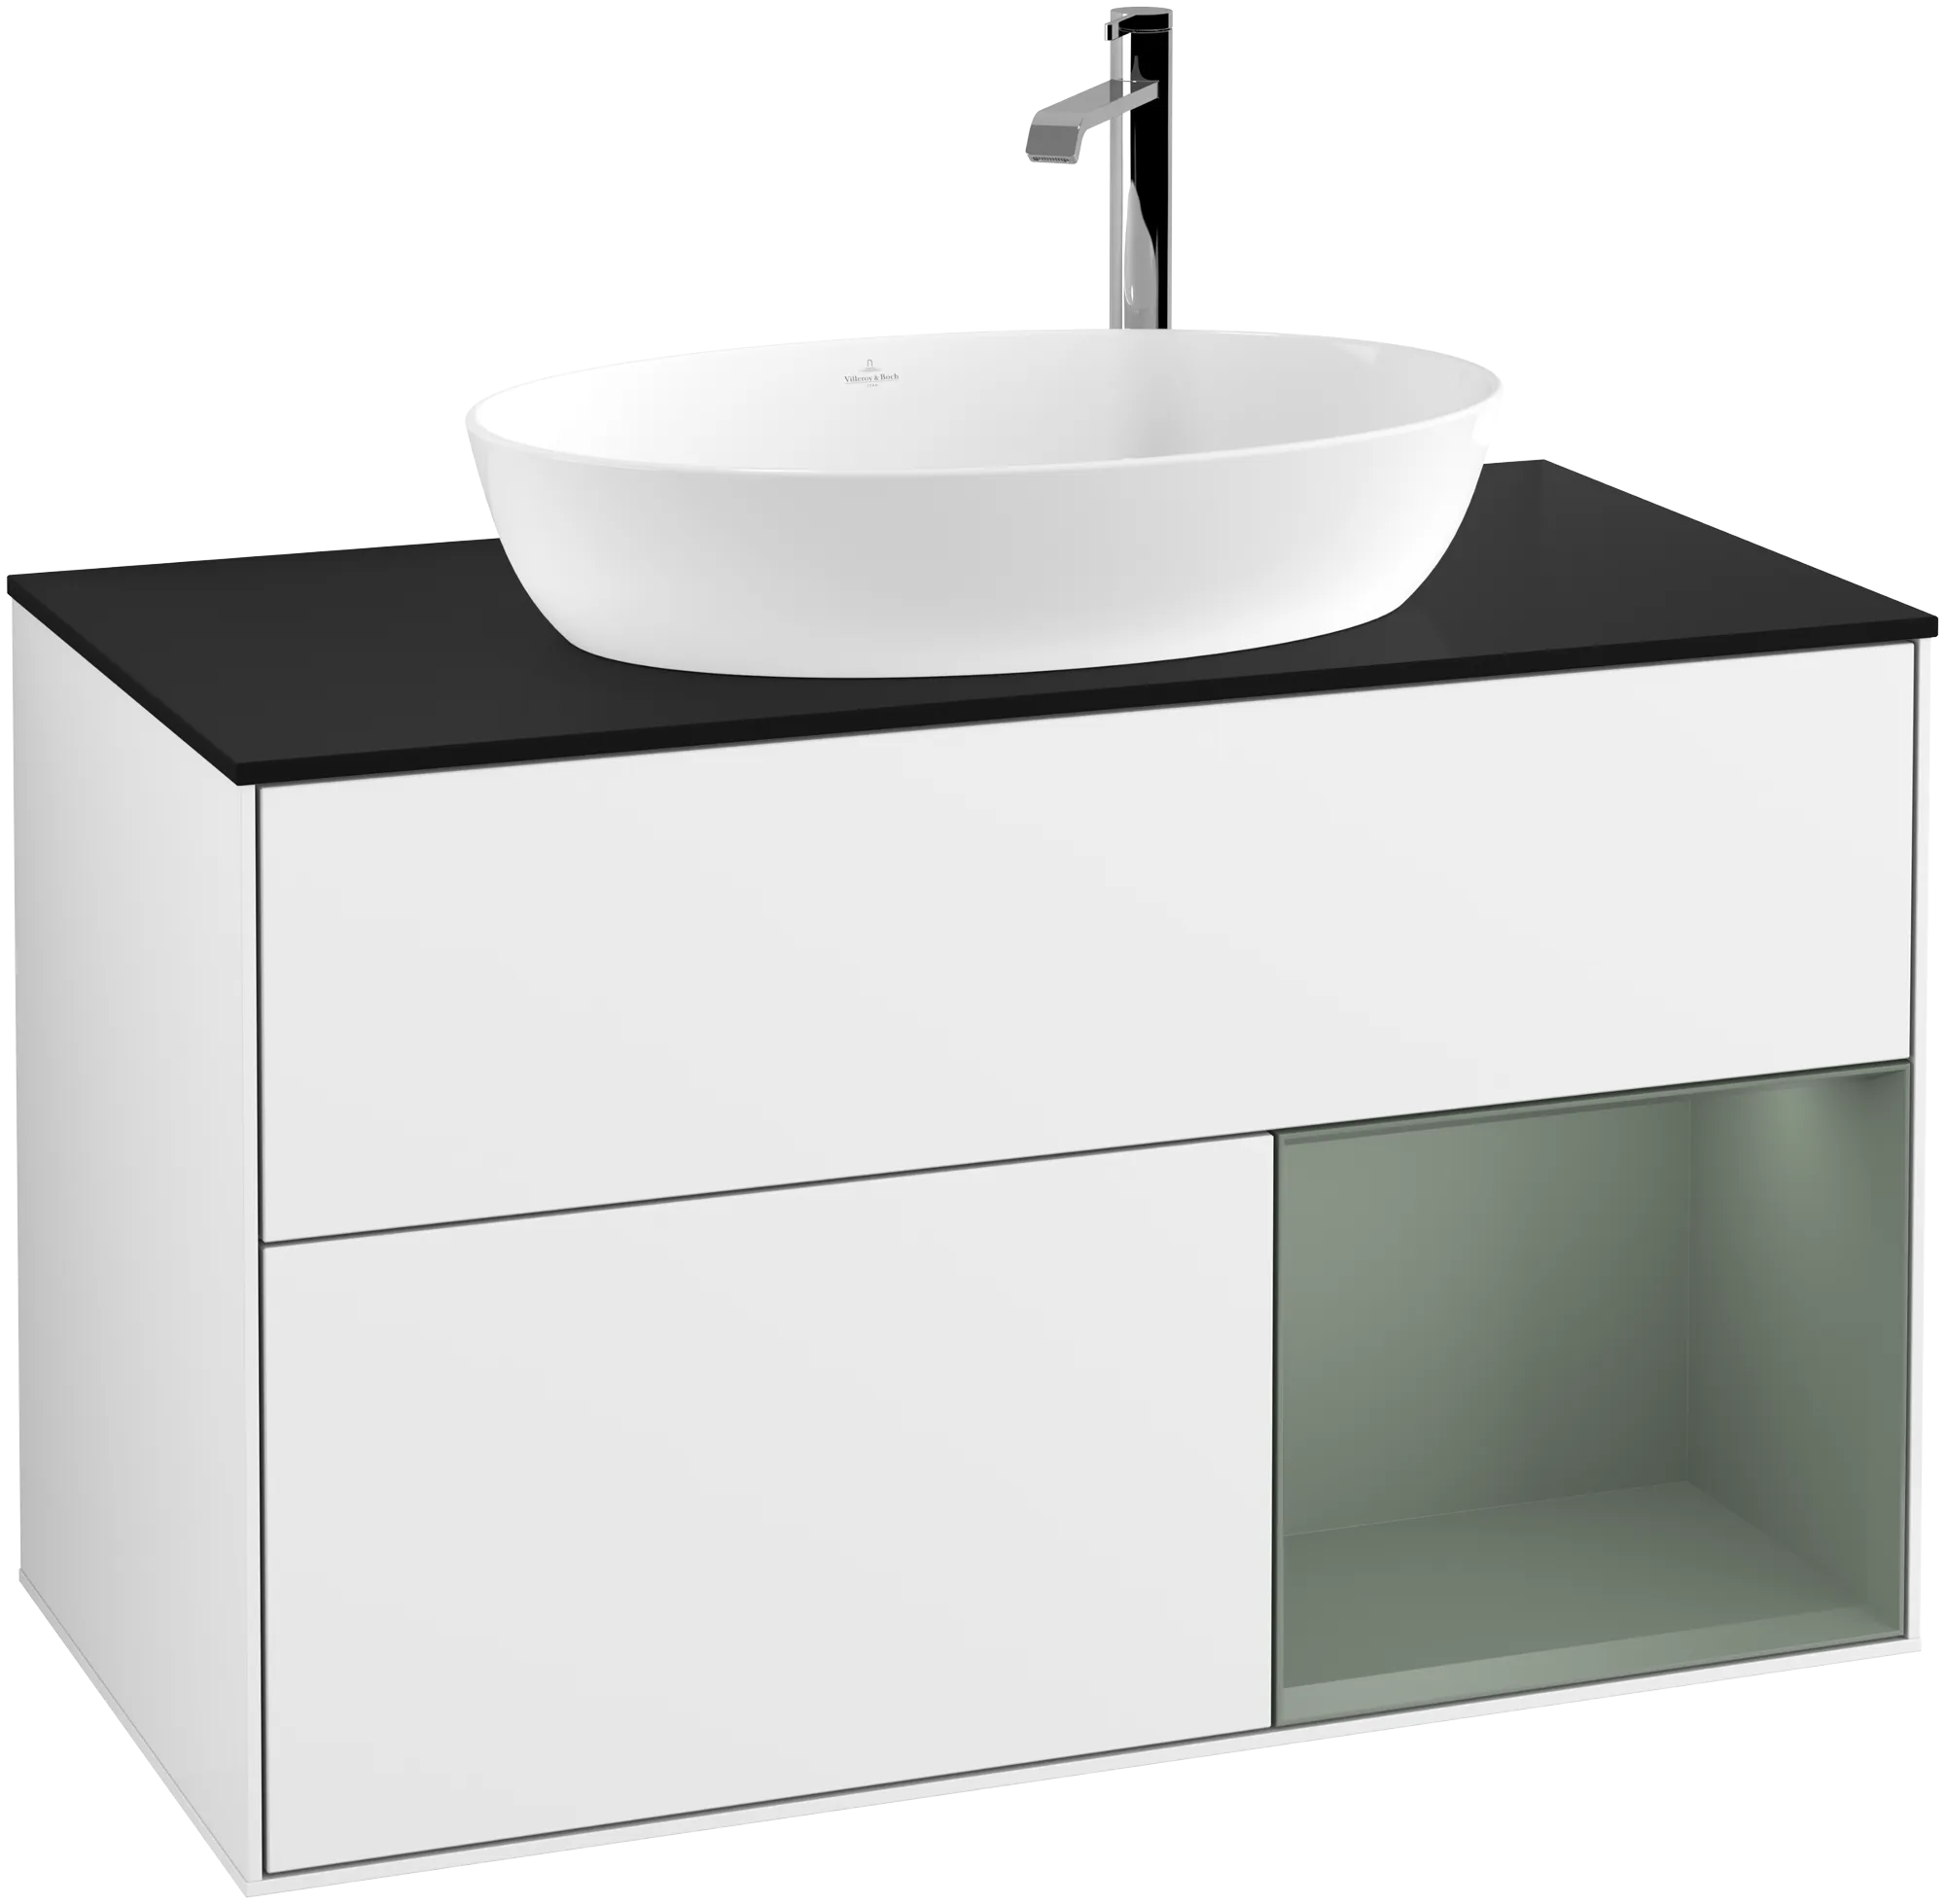 Зображення з  VILLEROY BOCH Finion Vanity unit, with lighting, 2 pull-out compartments, 1000 x 603 x 501 mm, Glossy White Lacquer / Olive Matt Lacquer / Glass Black Matt #G902GMGF